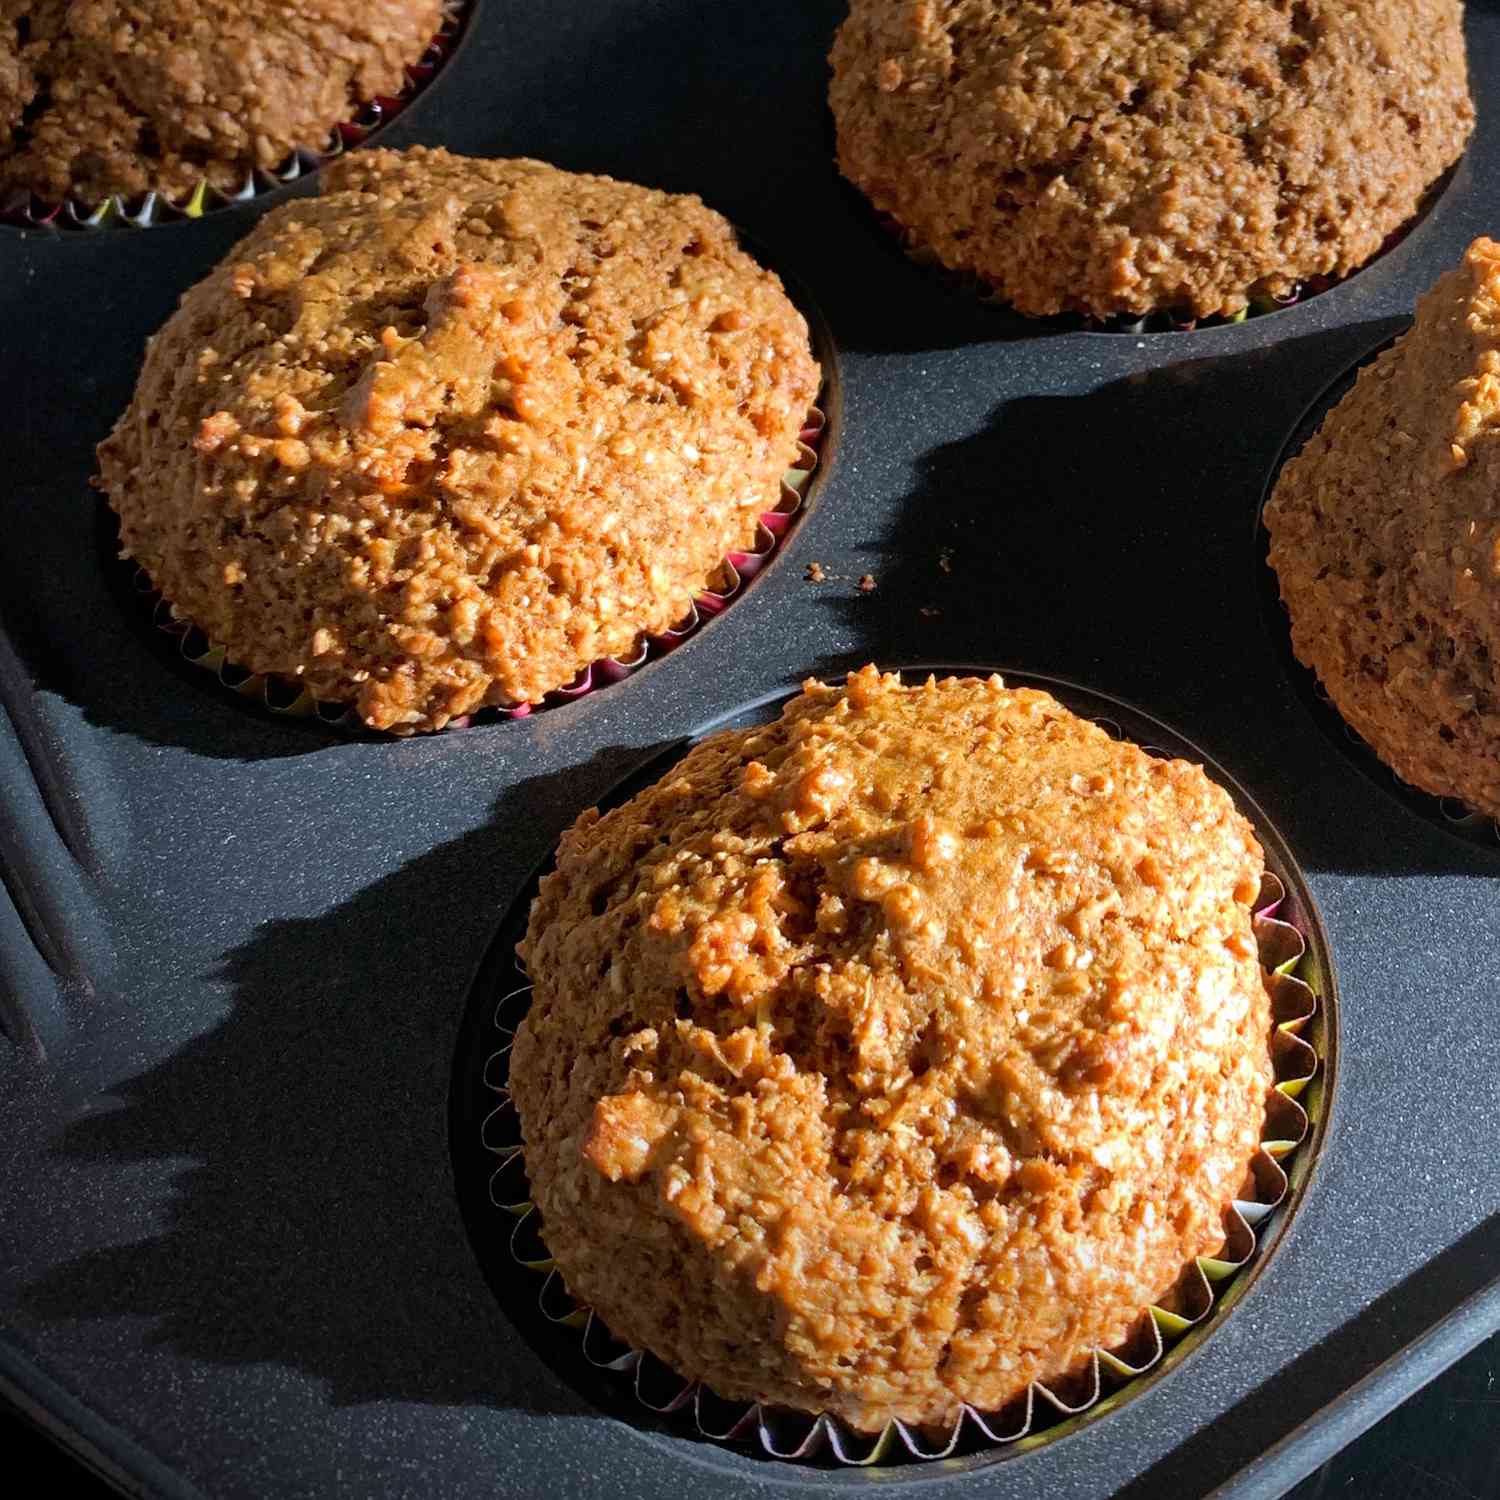 freshly baked bran muffins in a muffin pan